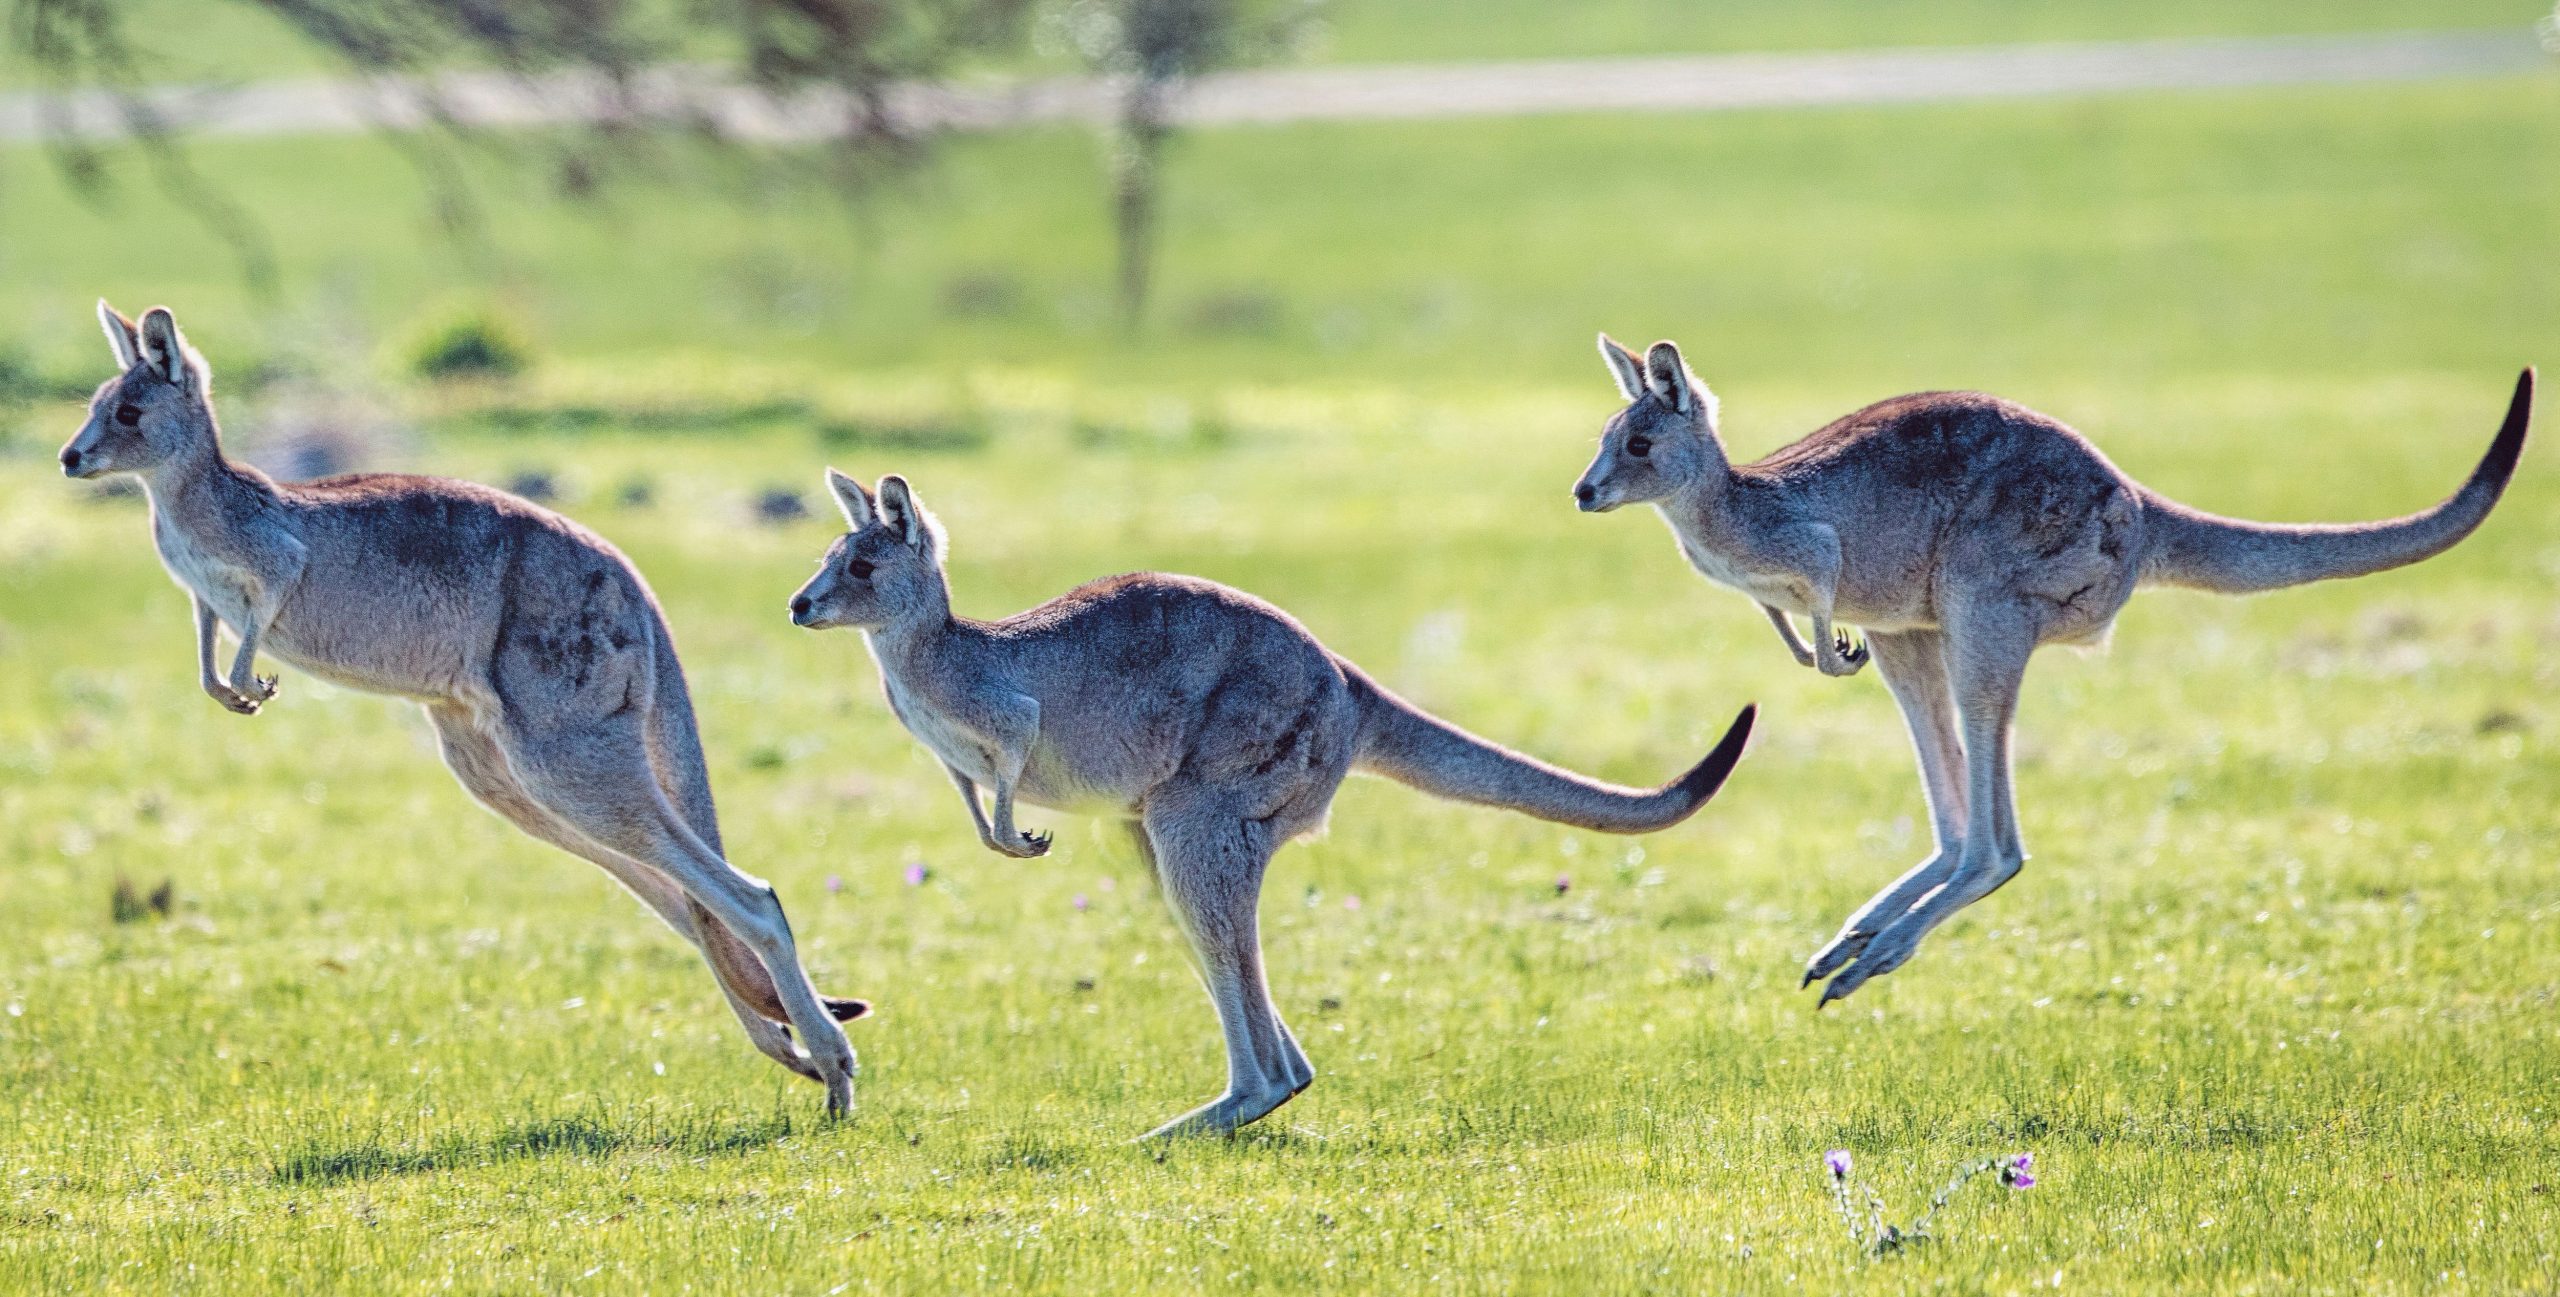 Have a great experience of watching Kangaroos in the wild